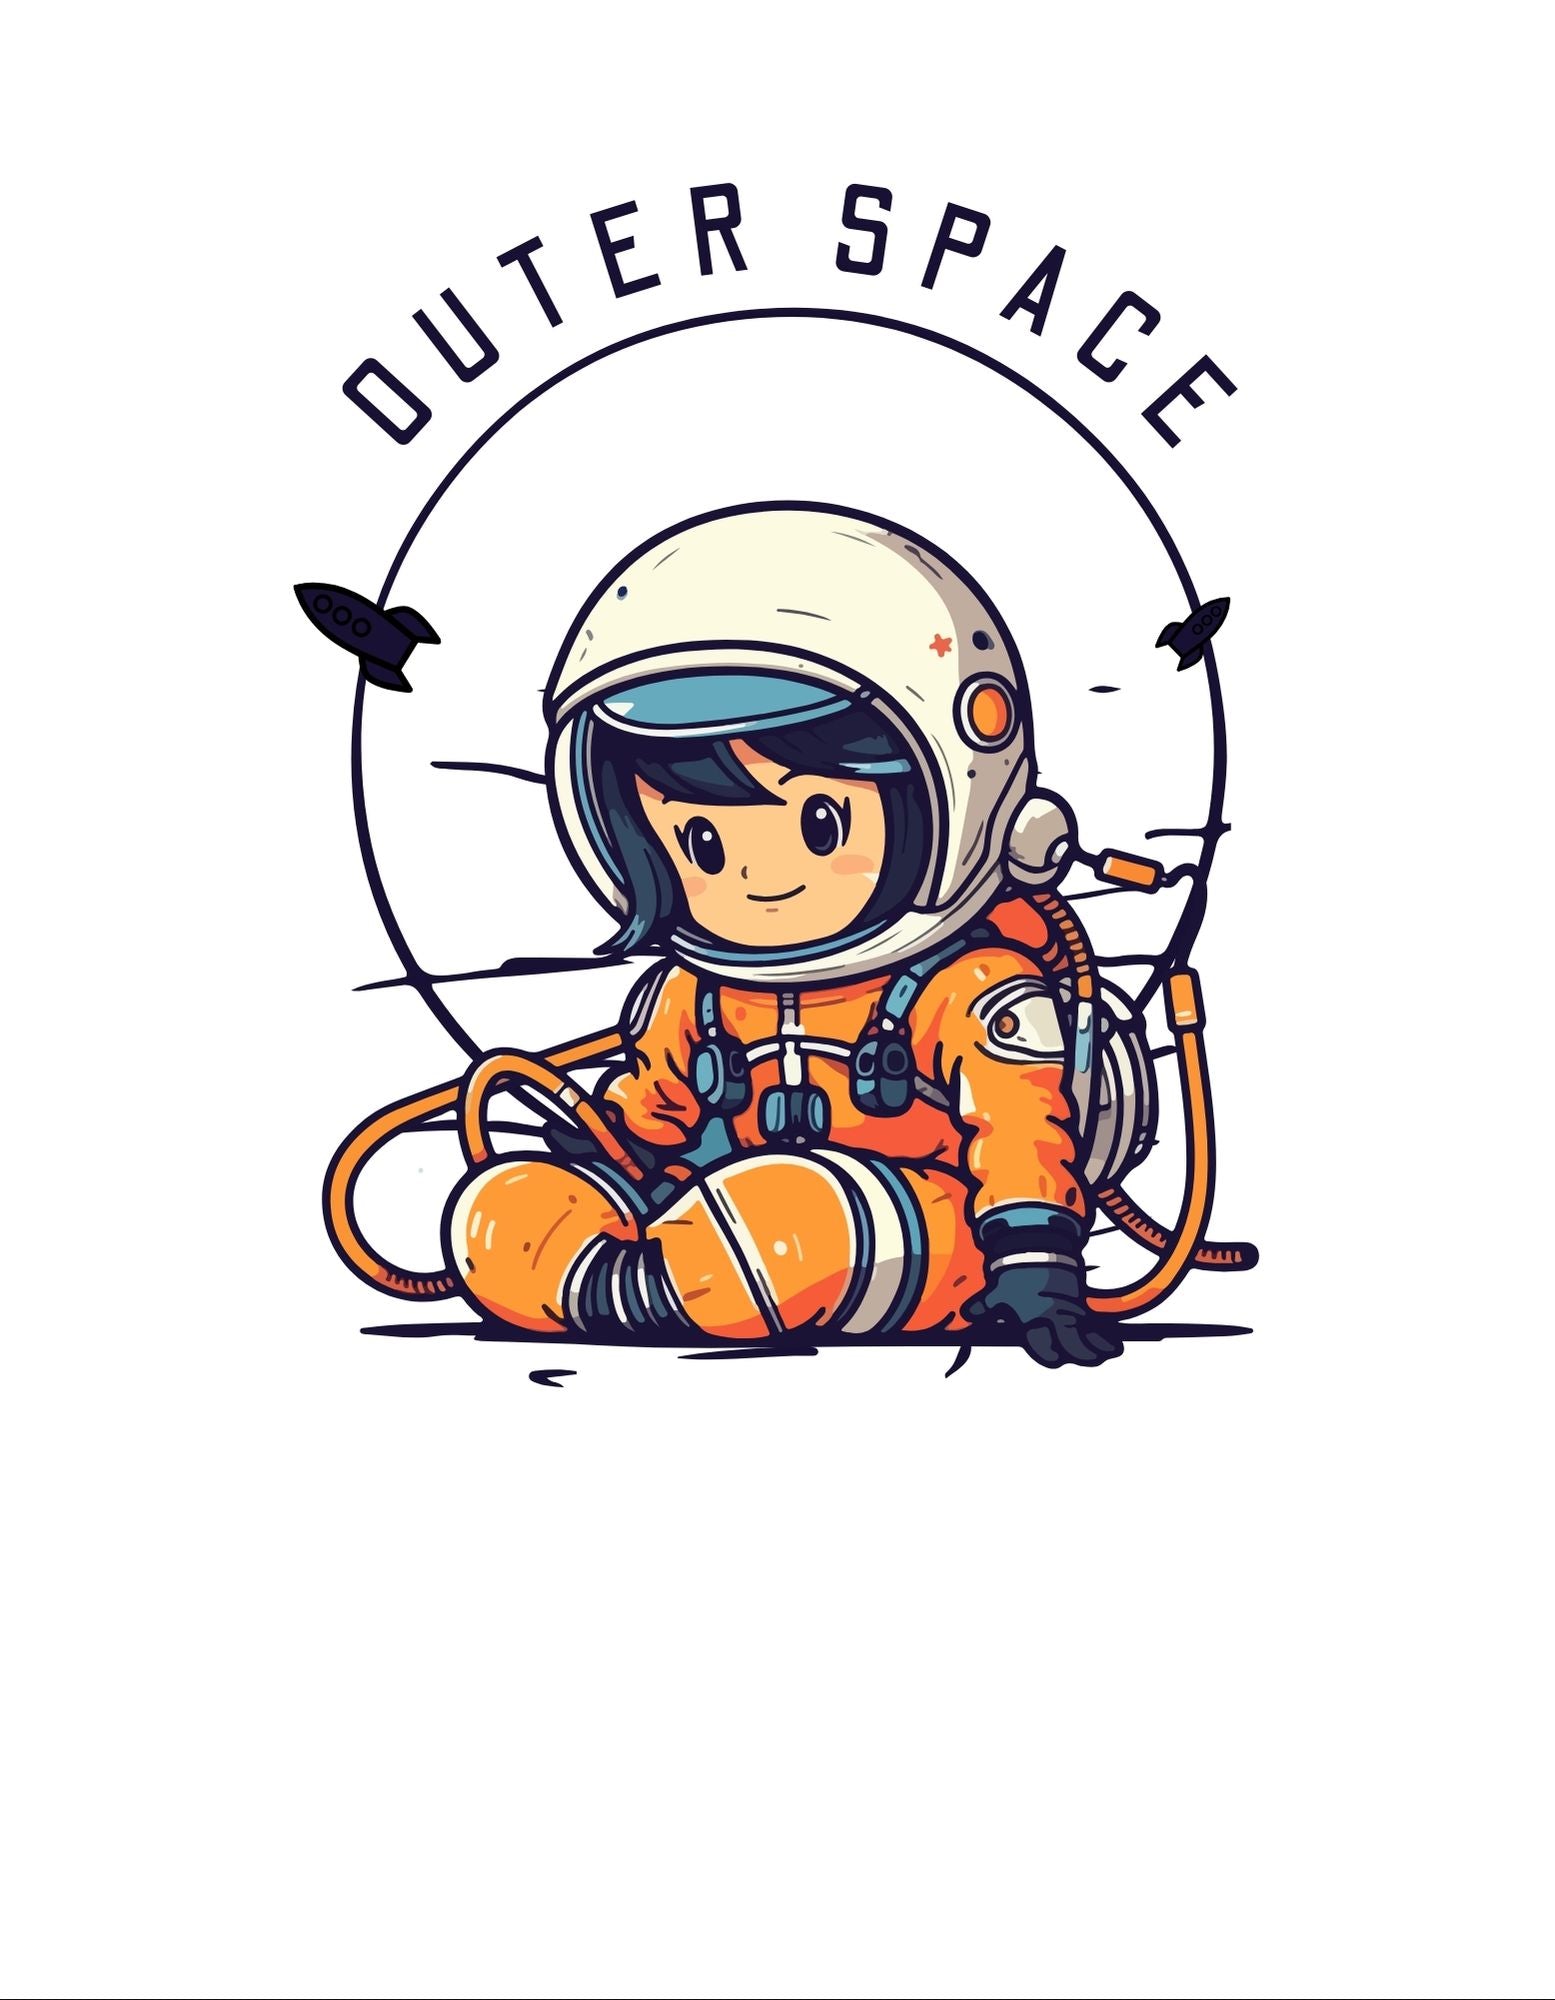  Outer Woods Men's Outer Space Graphic Printed T-Shirt